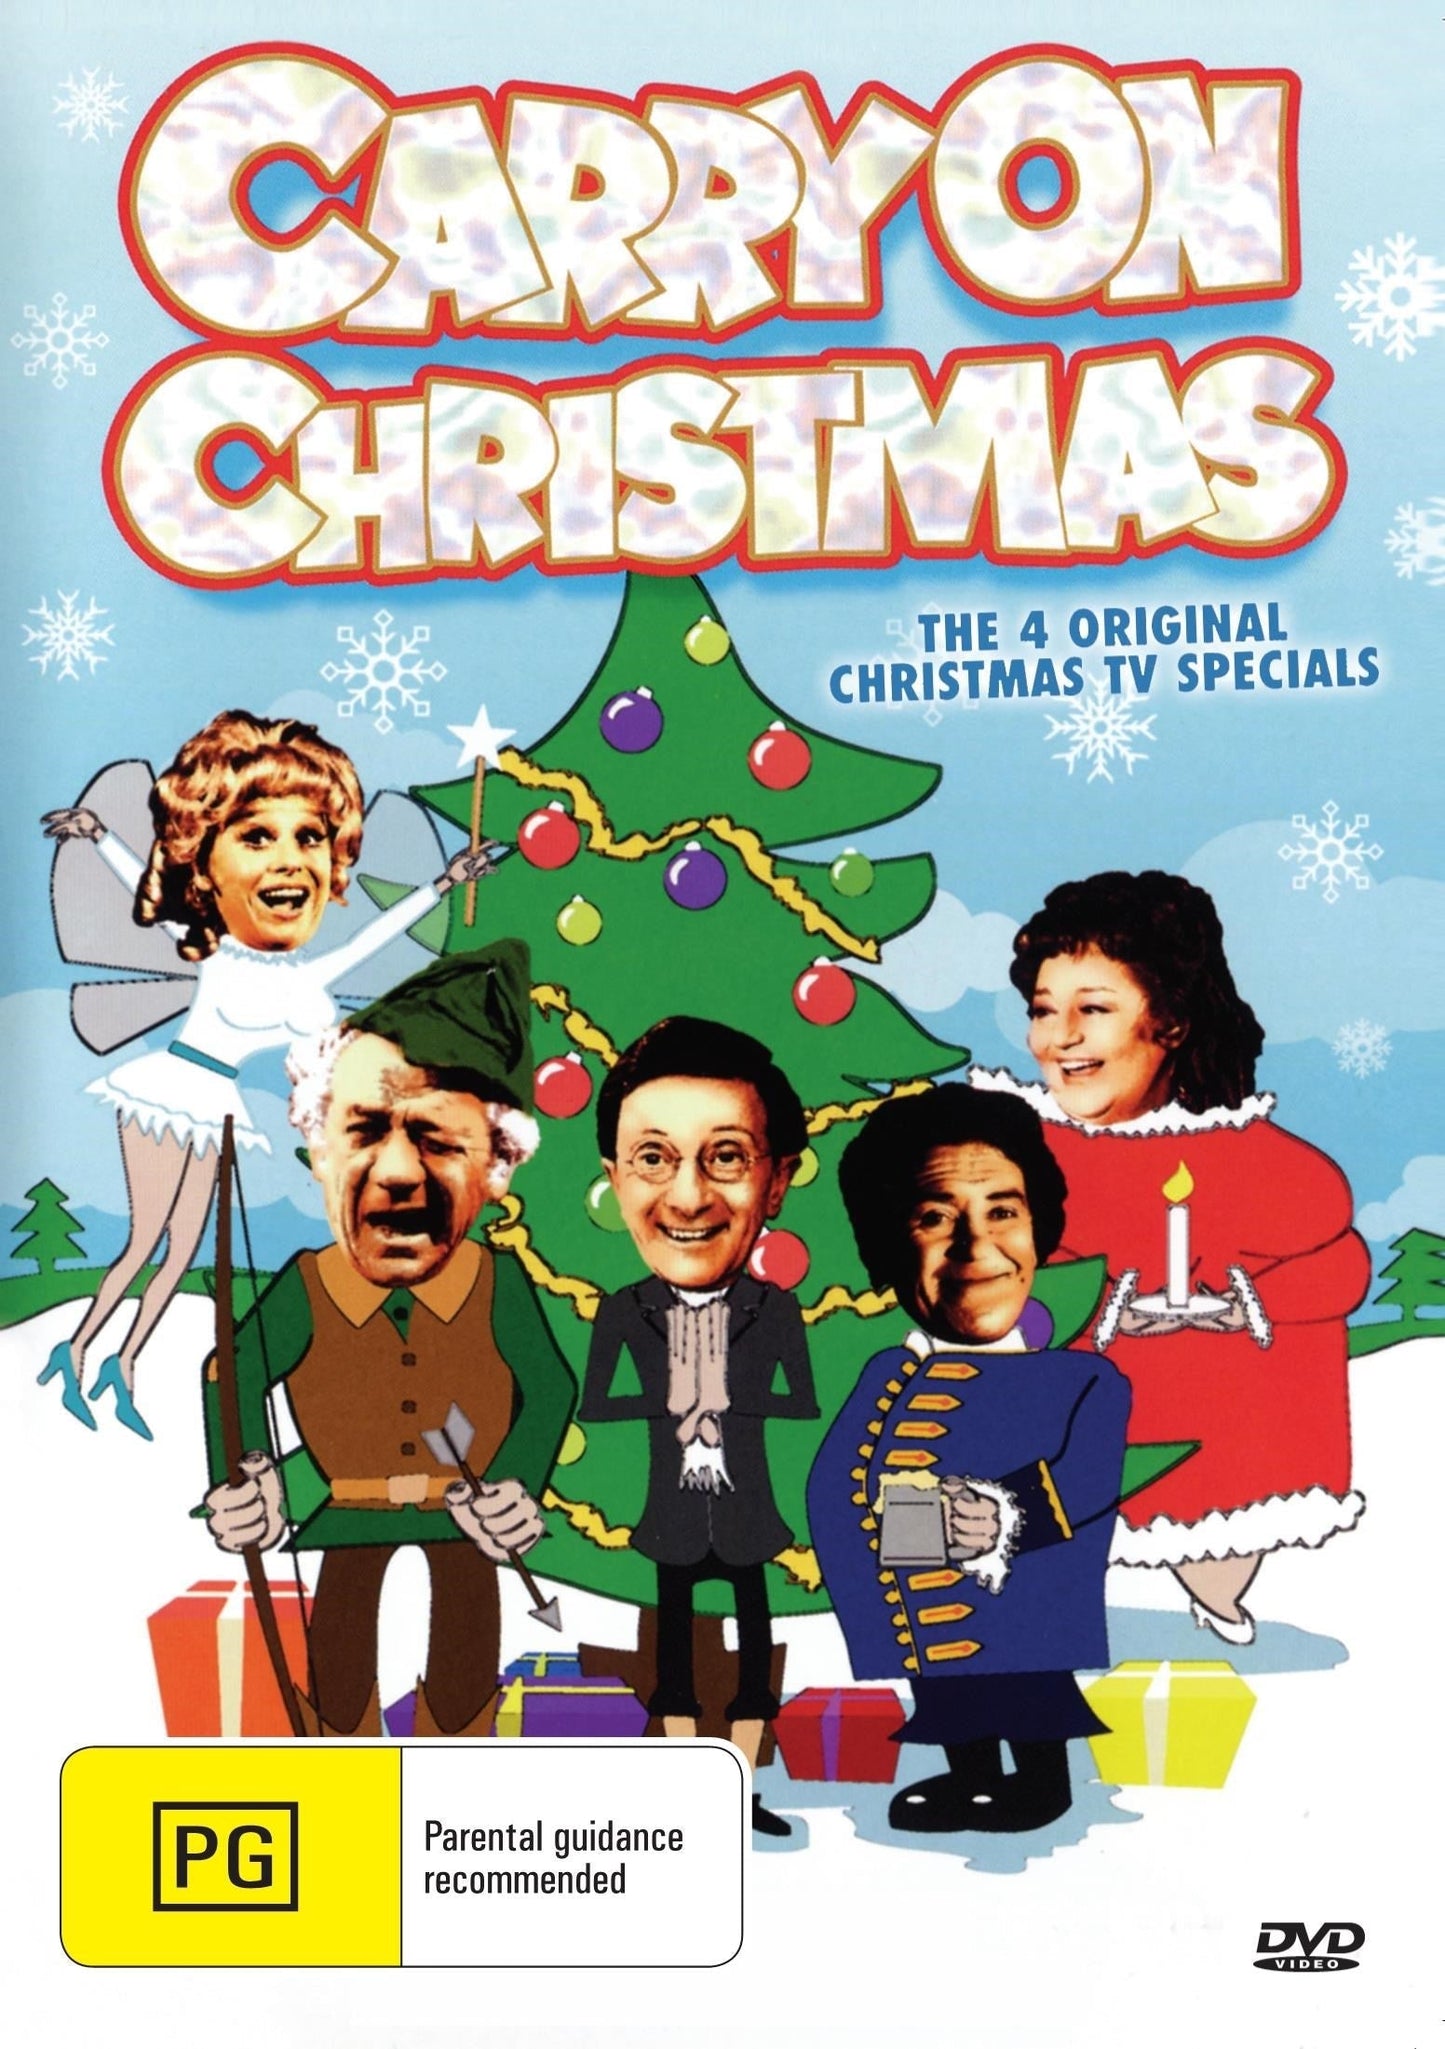 Carry on Christmas rareandcollectibledvds